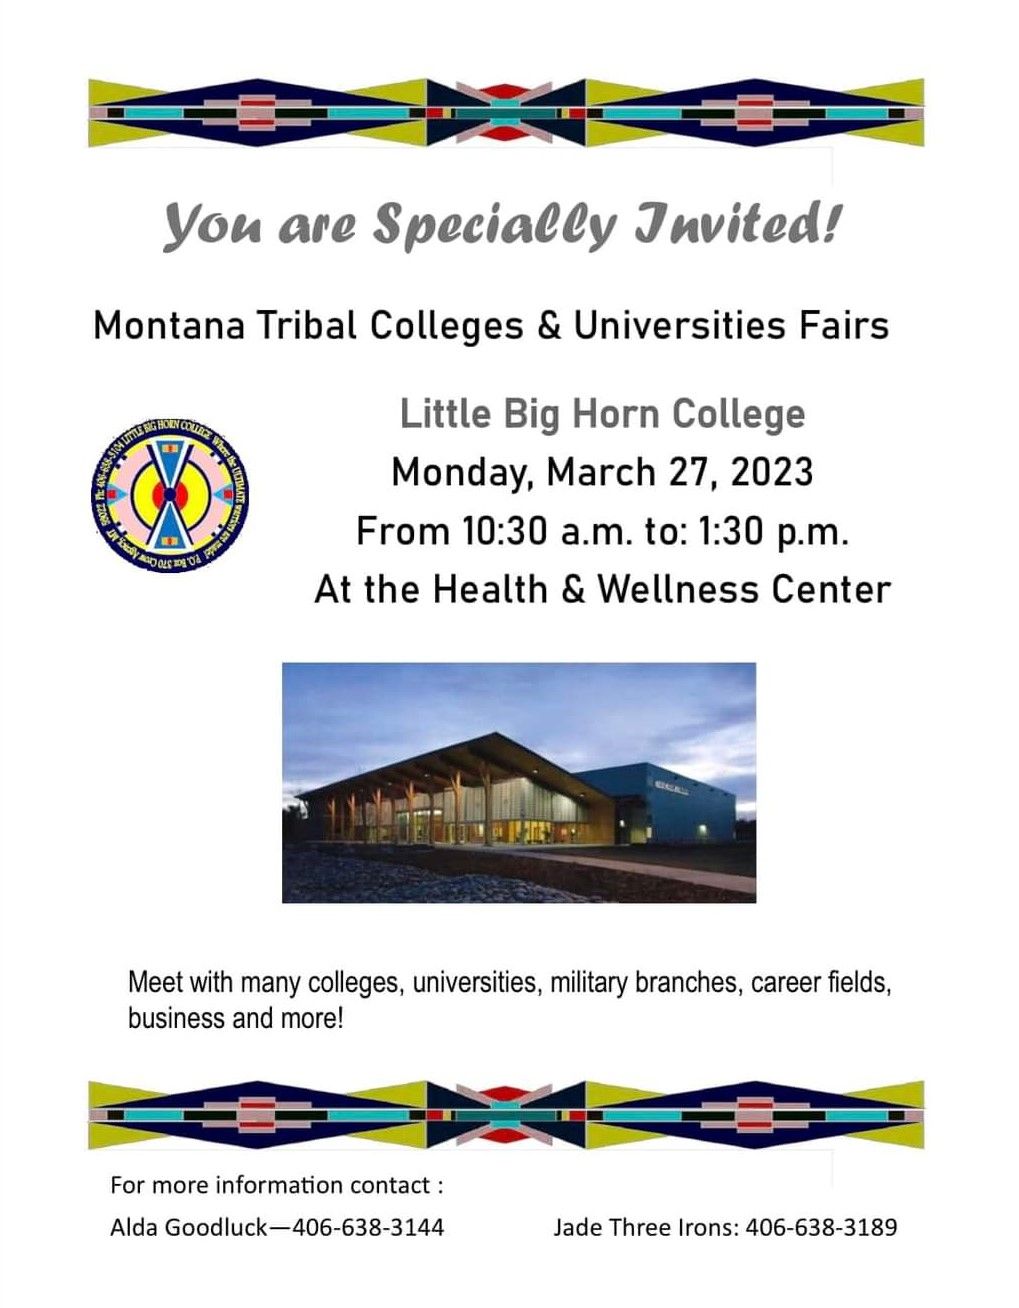 Montana Tribal Colleges & Universities Fair Comes to LBHC